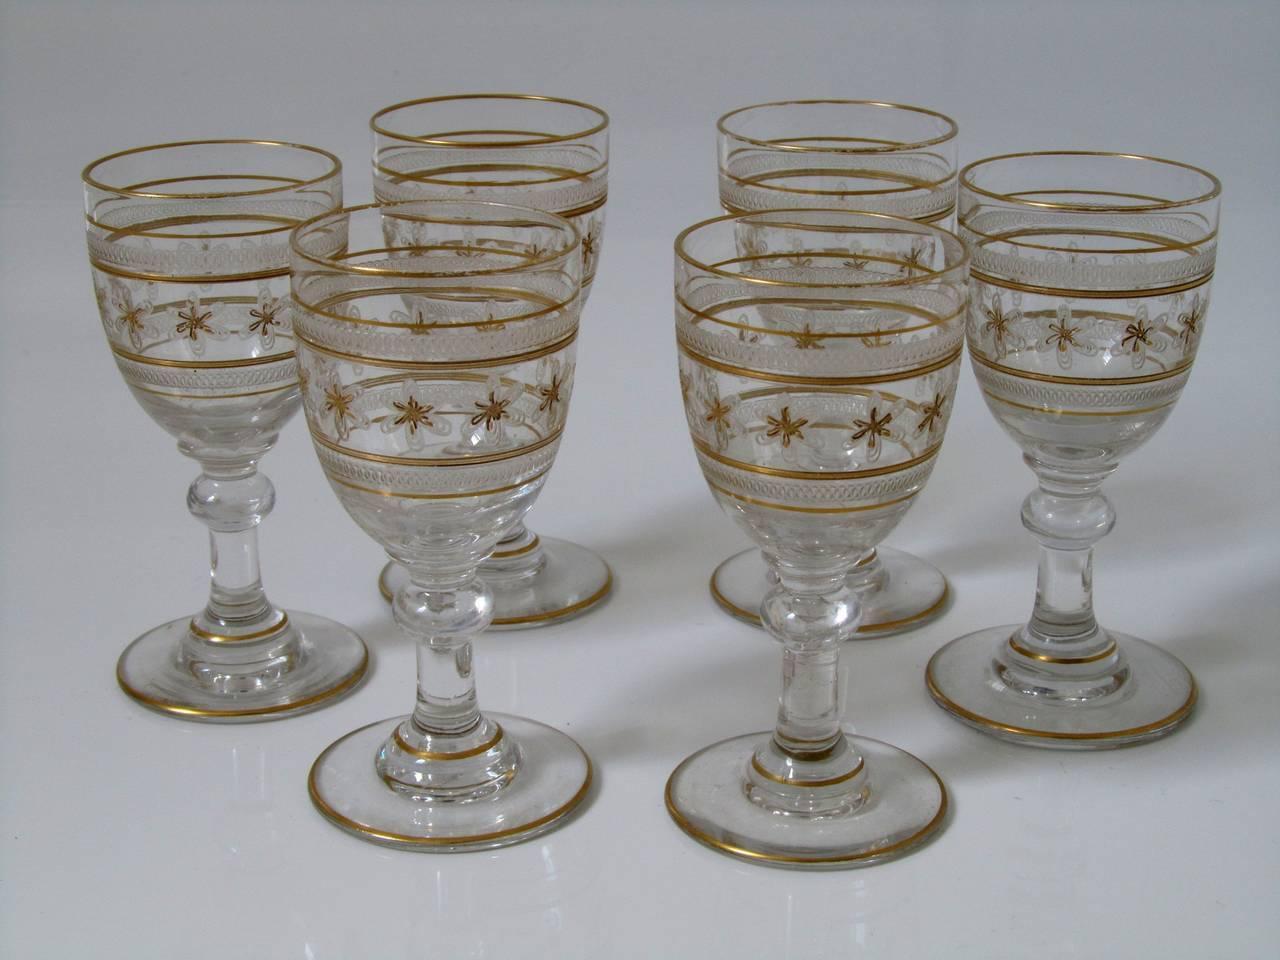 Saint Louis antique French enamel gold crystal liquor or aperitif service seven-piece.

Antique French Saint Louis crystal liquor or aperitif service, circa 1908. Comprising of a liquor decanter and six cordial glasses. Fine quality crystal,